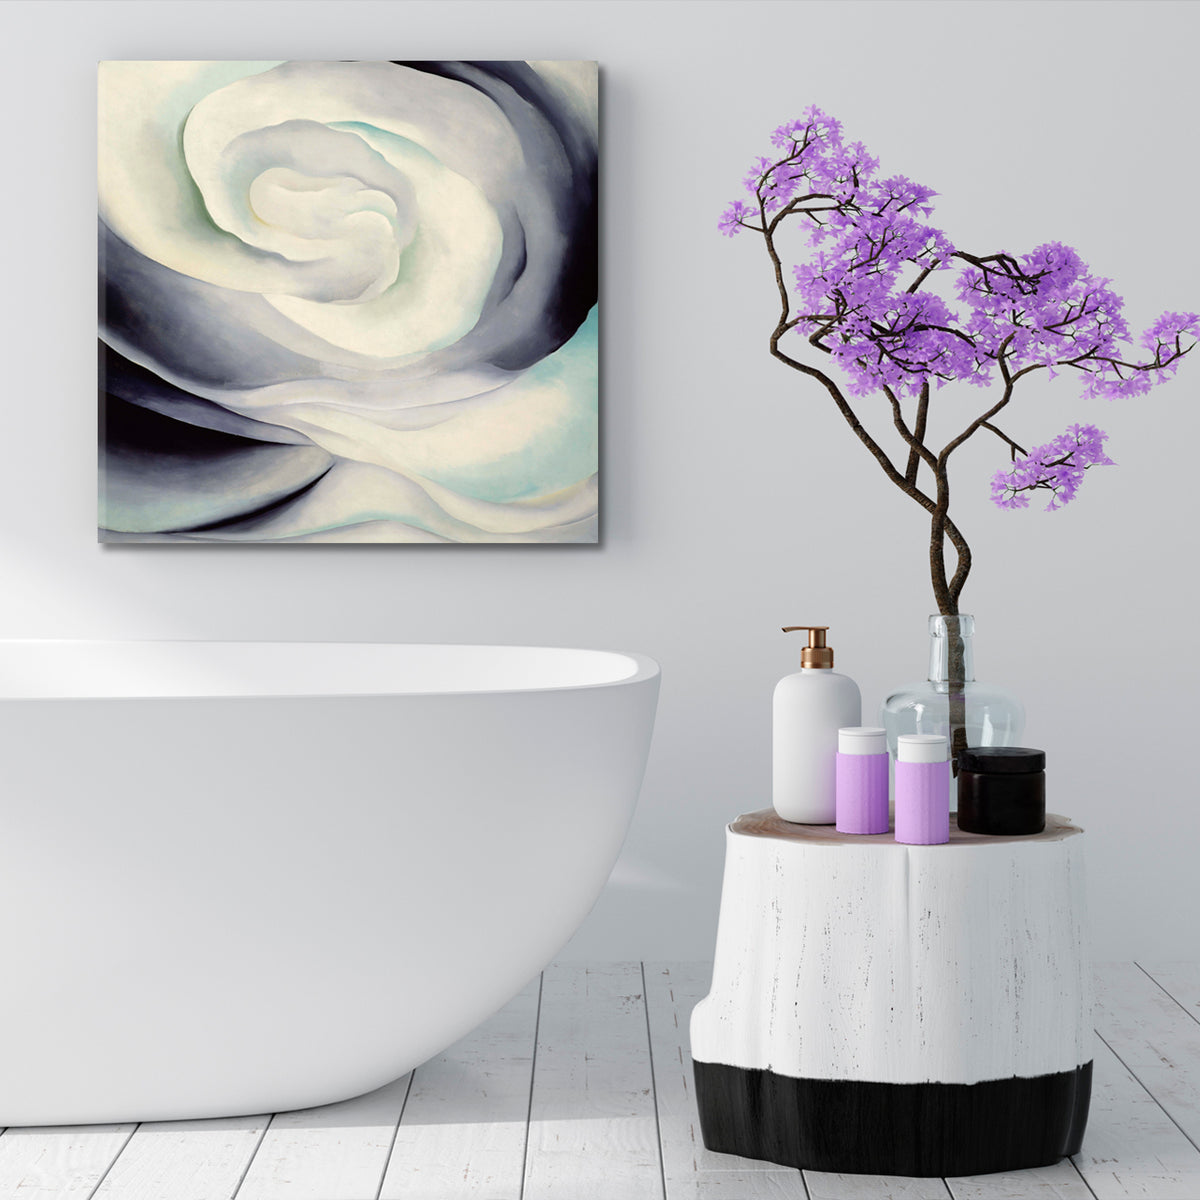 Abstraction White Rose Abstract Flowes Swirls  - Square Abstract Art Print Artesty 1 Panel 12"x12" 